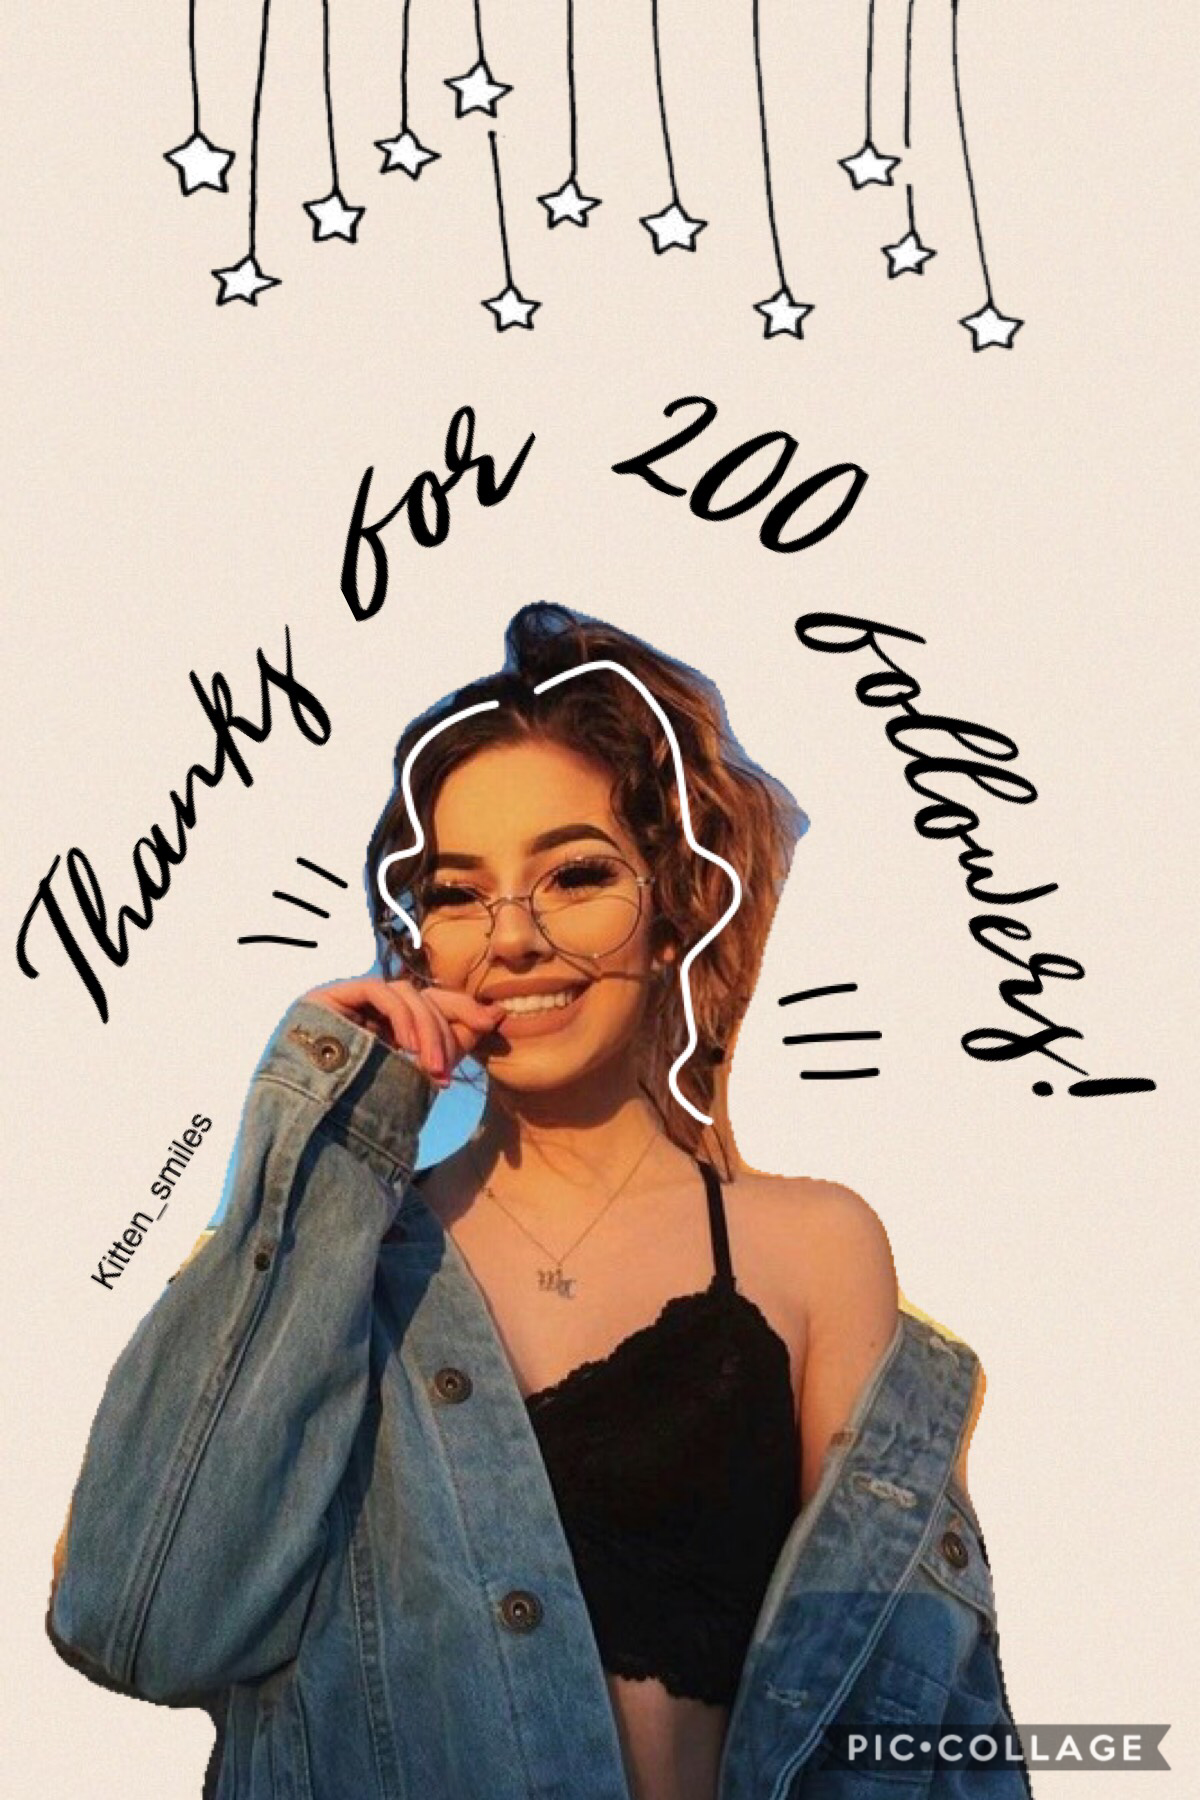 💫TAP💫
Thank you everyone for 200 followers! It’s great to have such kind and supportive people on pc. You guys are awesome! 💛✨